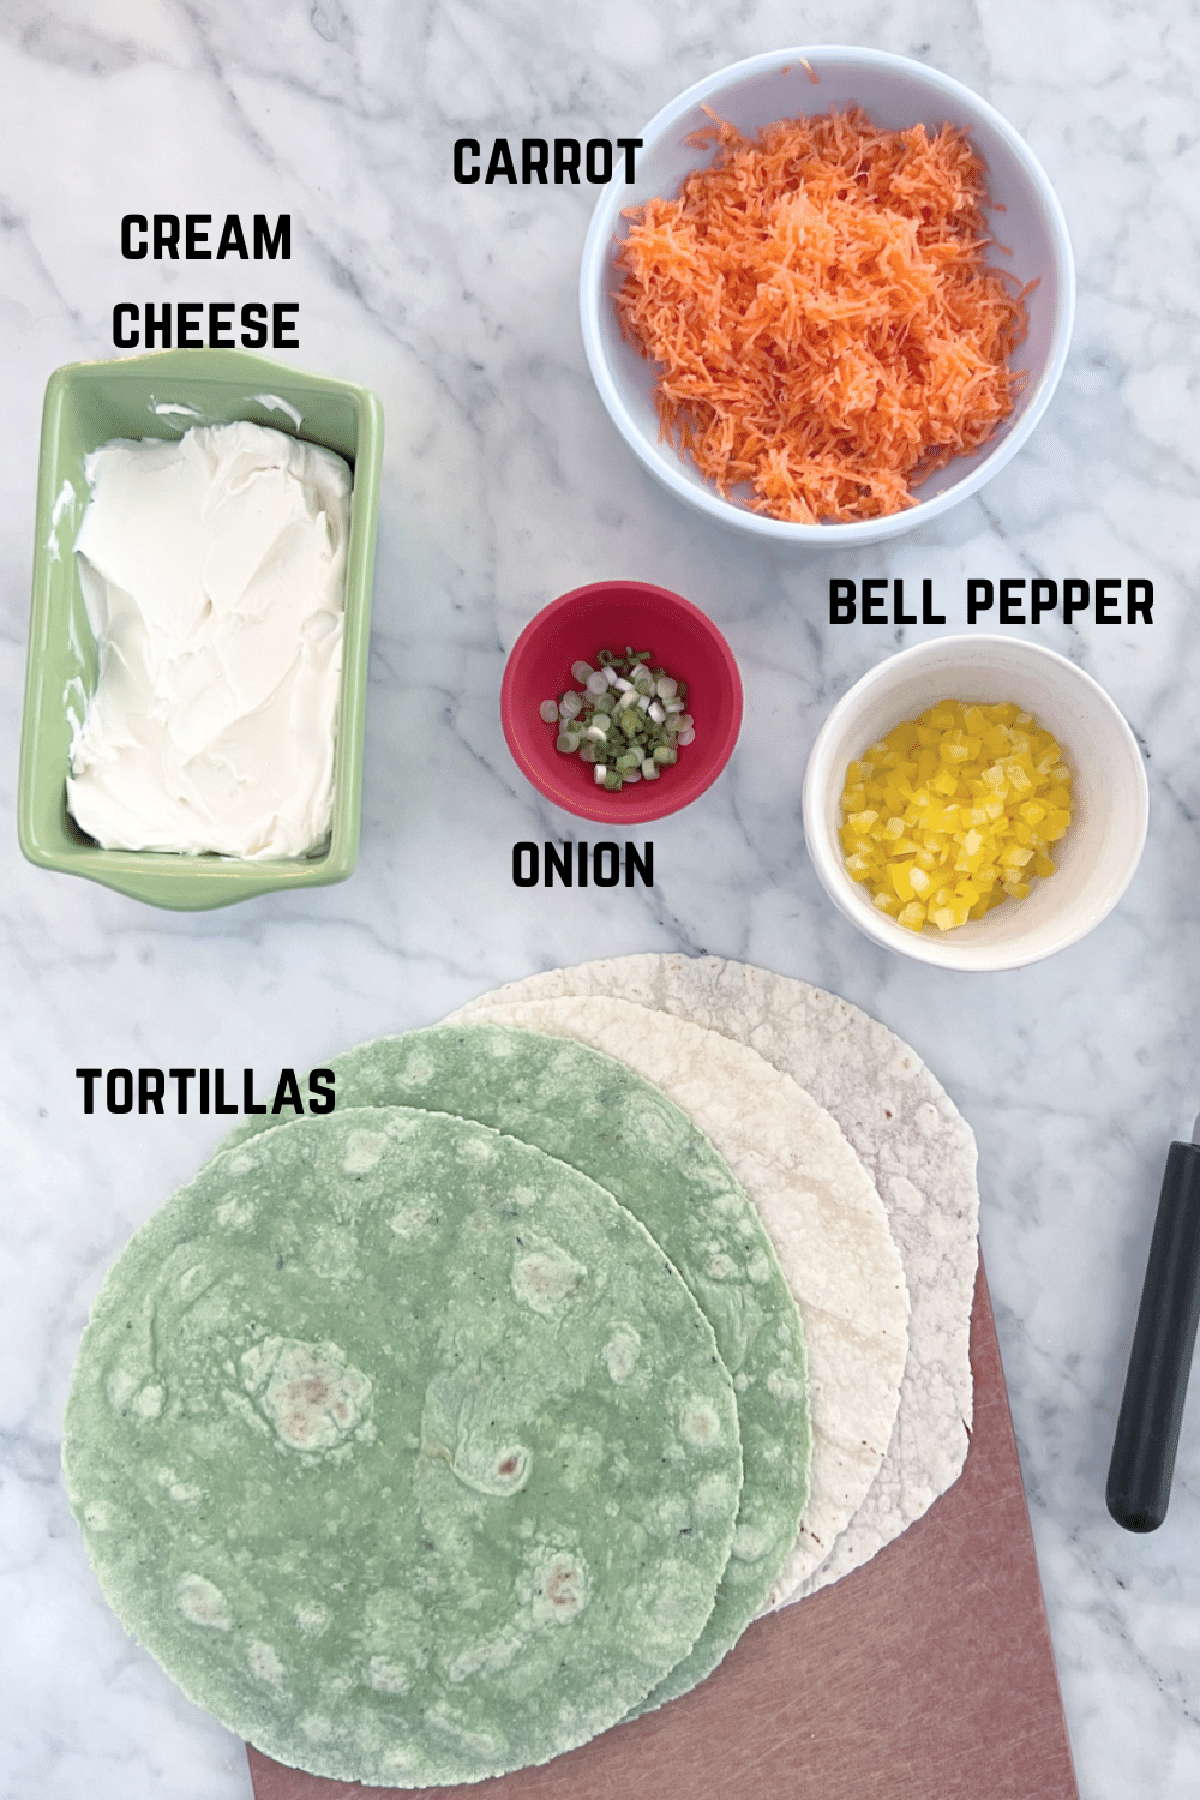 Overhead view of ingredients to make veggie pinwheels: grated carrot, cream cheese, green onion, bell pepper, tortillas.